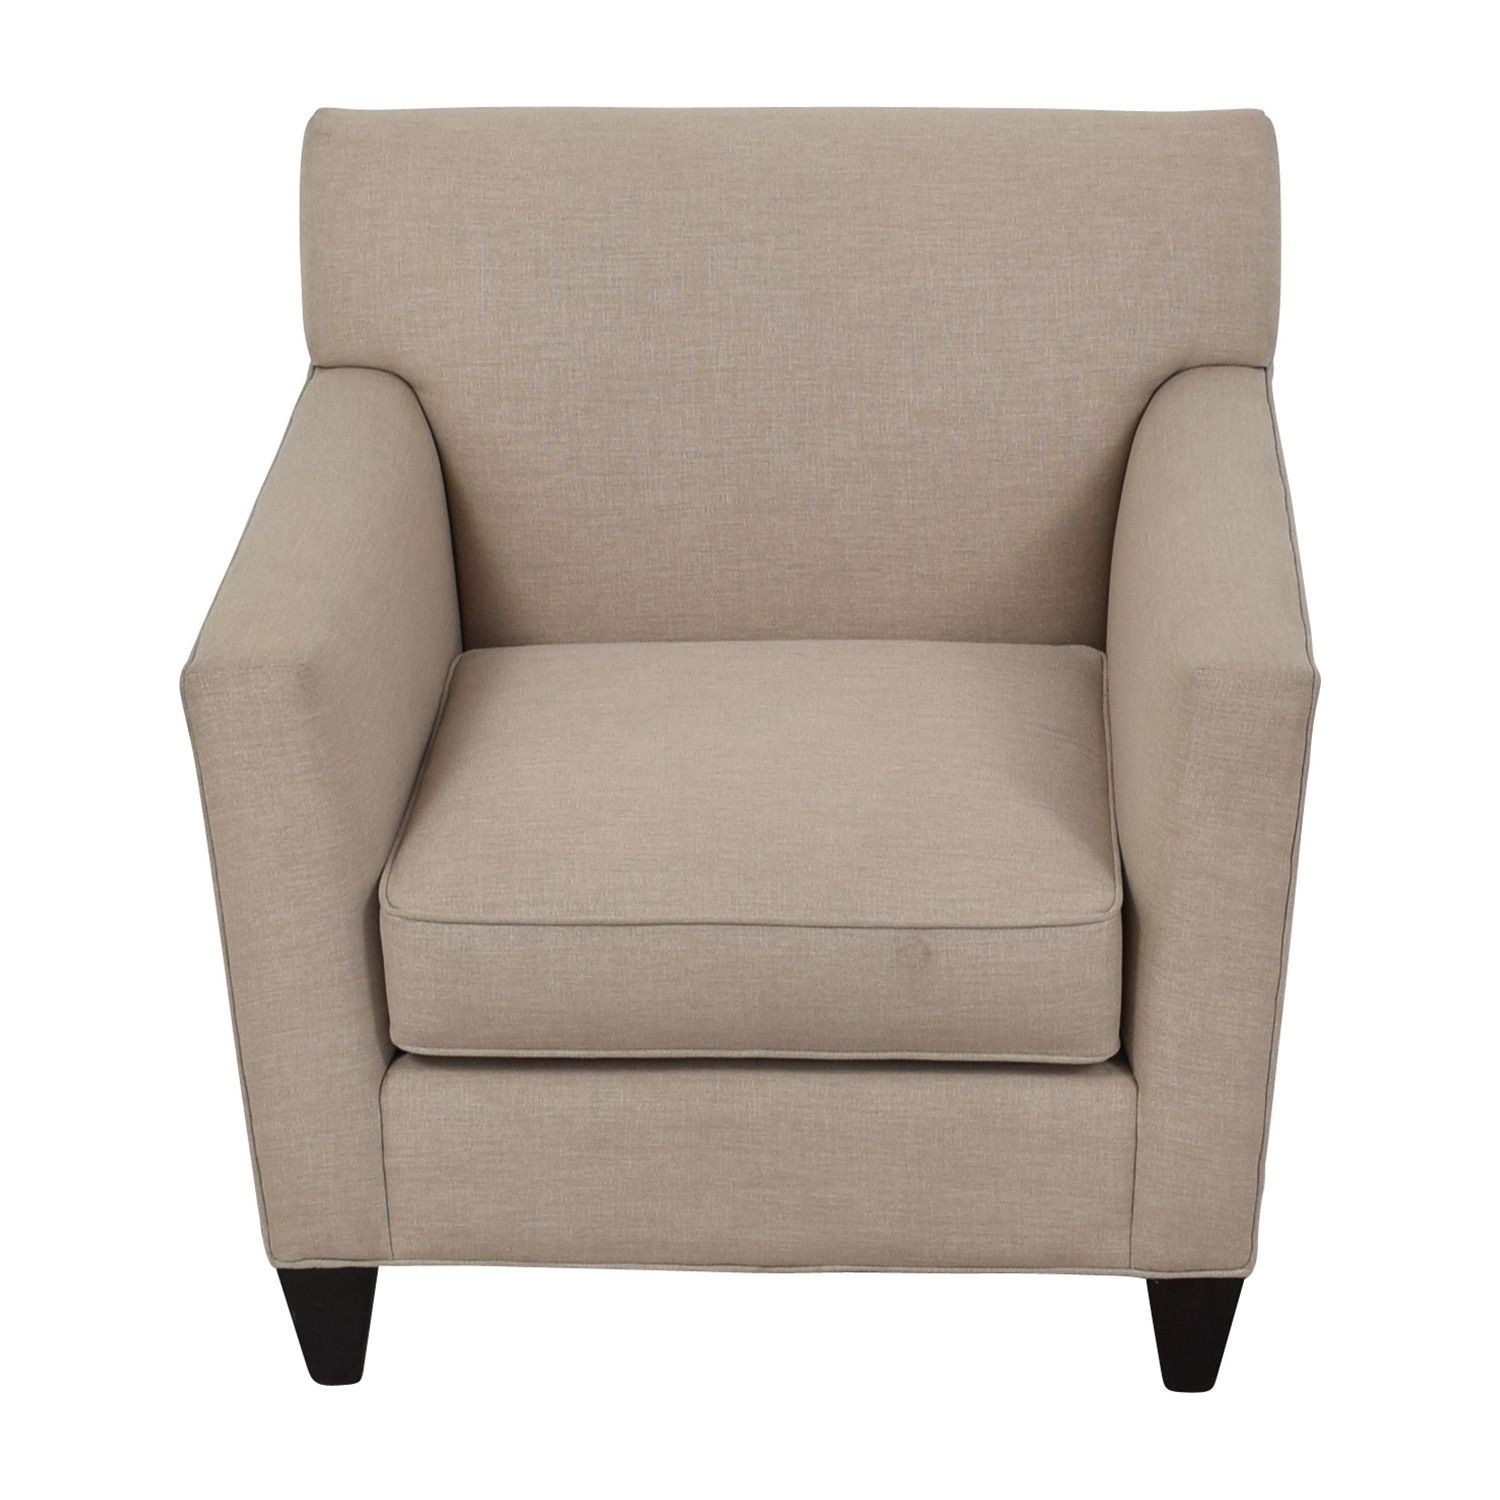 [%90% Off – Crate & Barrel Crate & Barrel Hennessy Sofa Chair / Chairs With Regard To Most Recently Released Sofa With Chairs|sofa With Chairs Regarding Most Up To Date 90% Off – Crate & Barrel Crate & Barrel Hennessy Sofa Chair / Chairs|well Liked Sofa With Chairs For 90% Off – Crate & Barrel Crate & Barrel Hennessy Sofa Chair / Chairs|well Known 90% Off – Crate & Barrel Crate & Barrel Hennessy Sofa Chair / Chairs Regarding Sofa With Chairs%] (Photo 1 of 15)